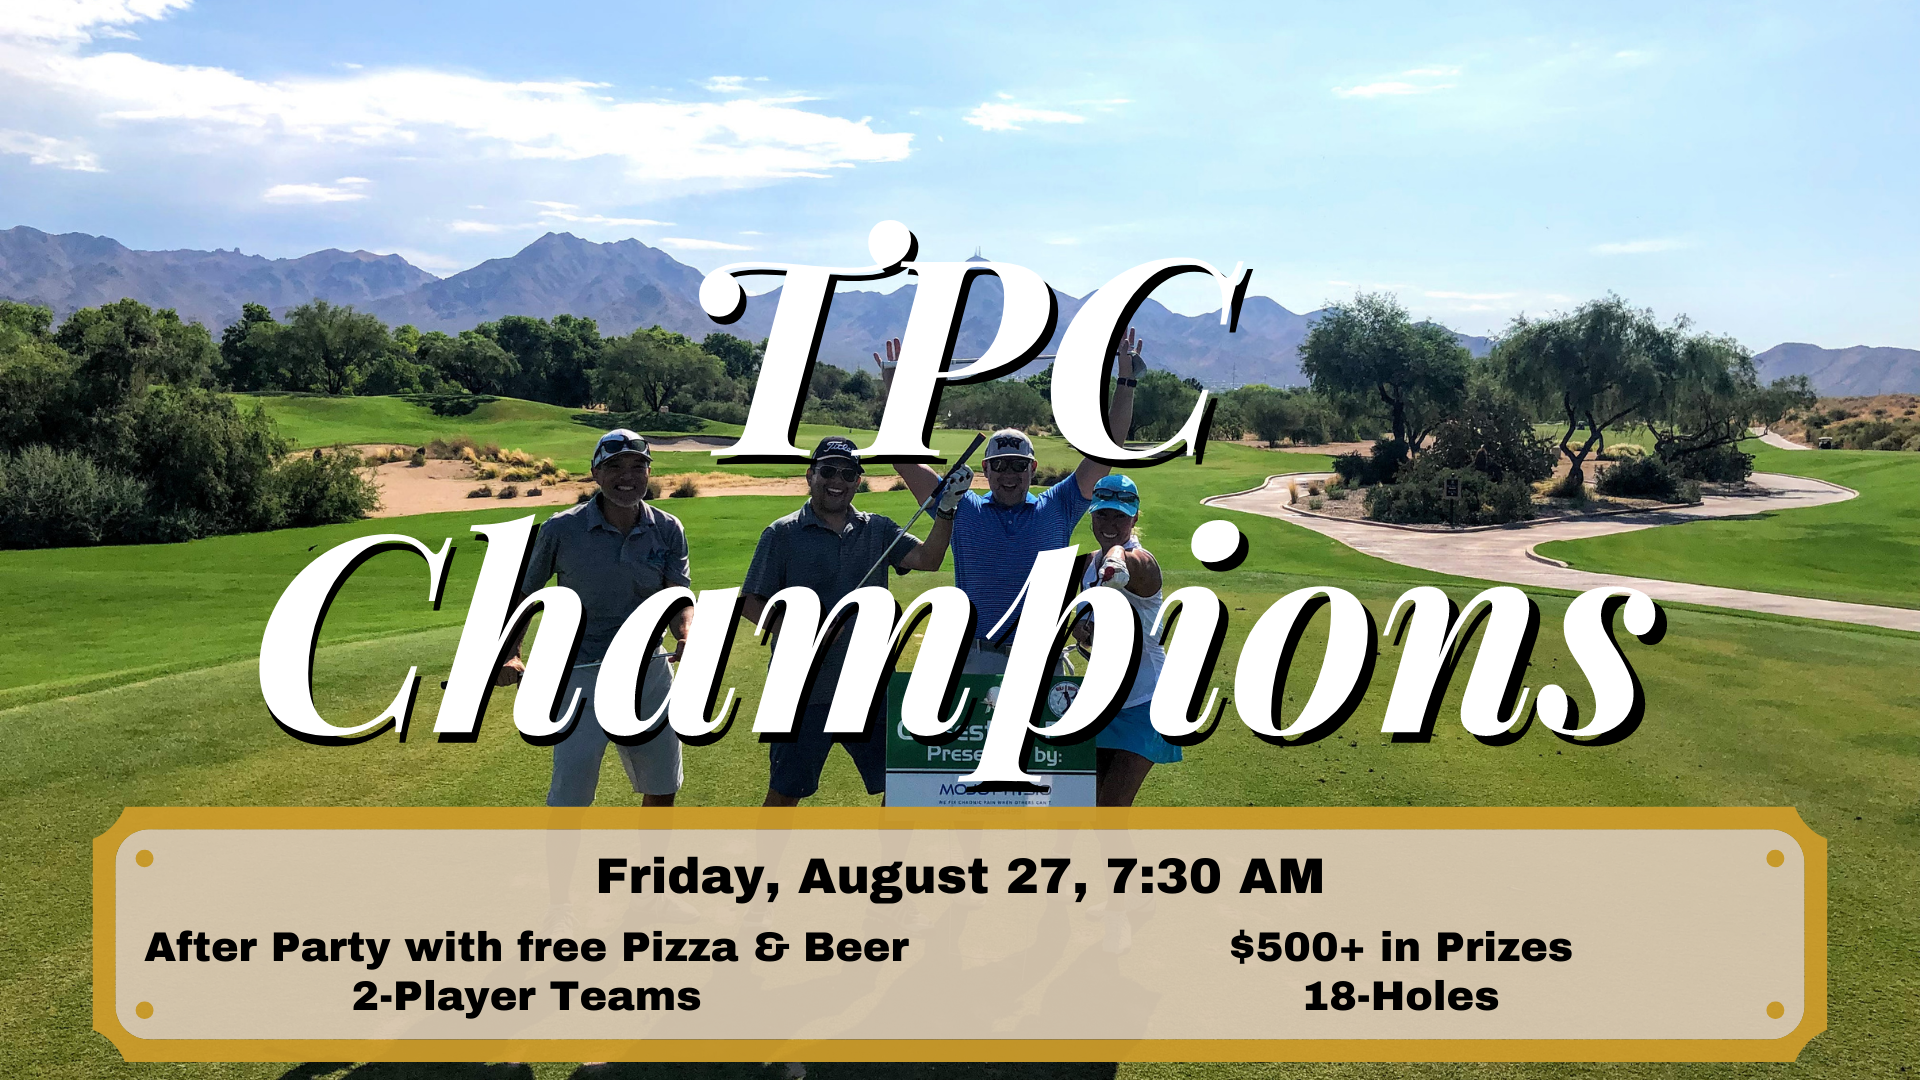 Golf & Grow tournament at TPC Champions course is a great way to meet great people and network for your business